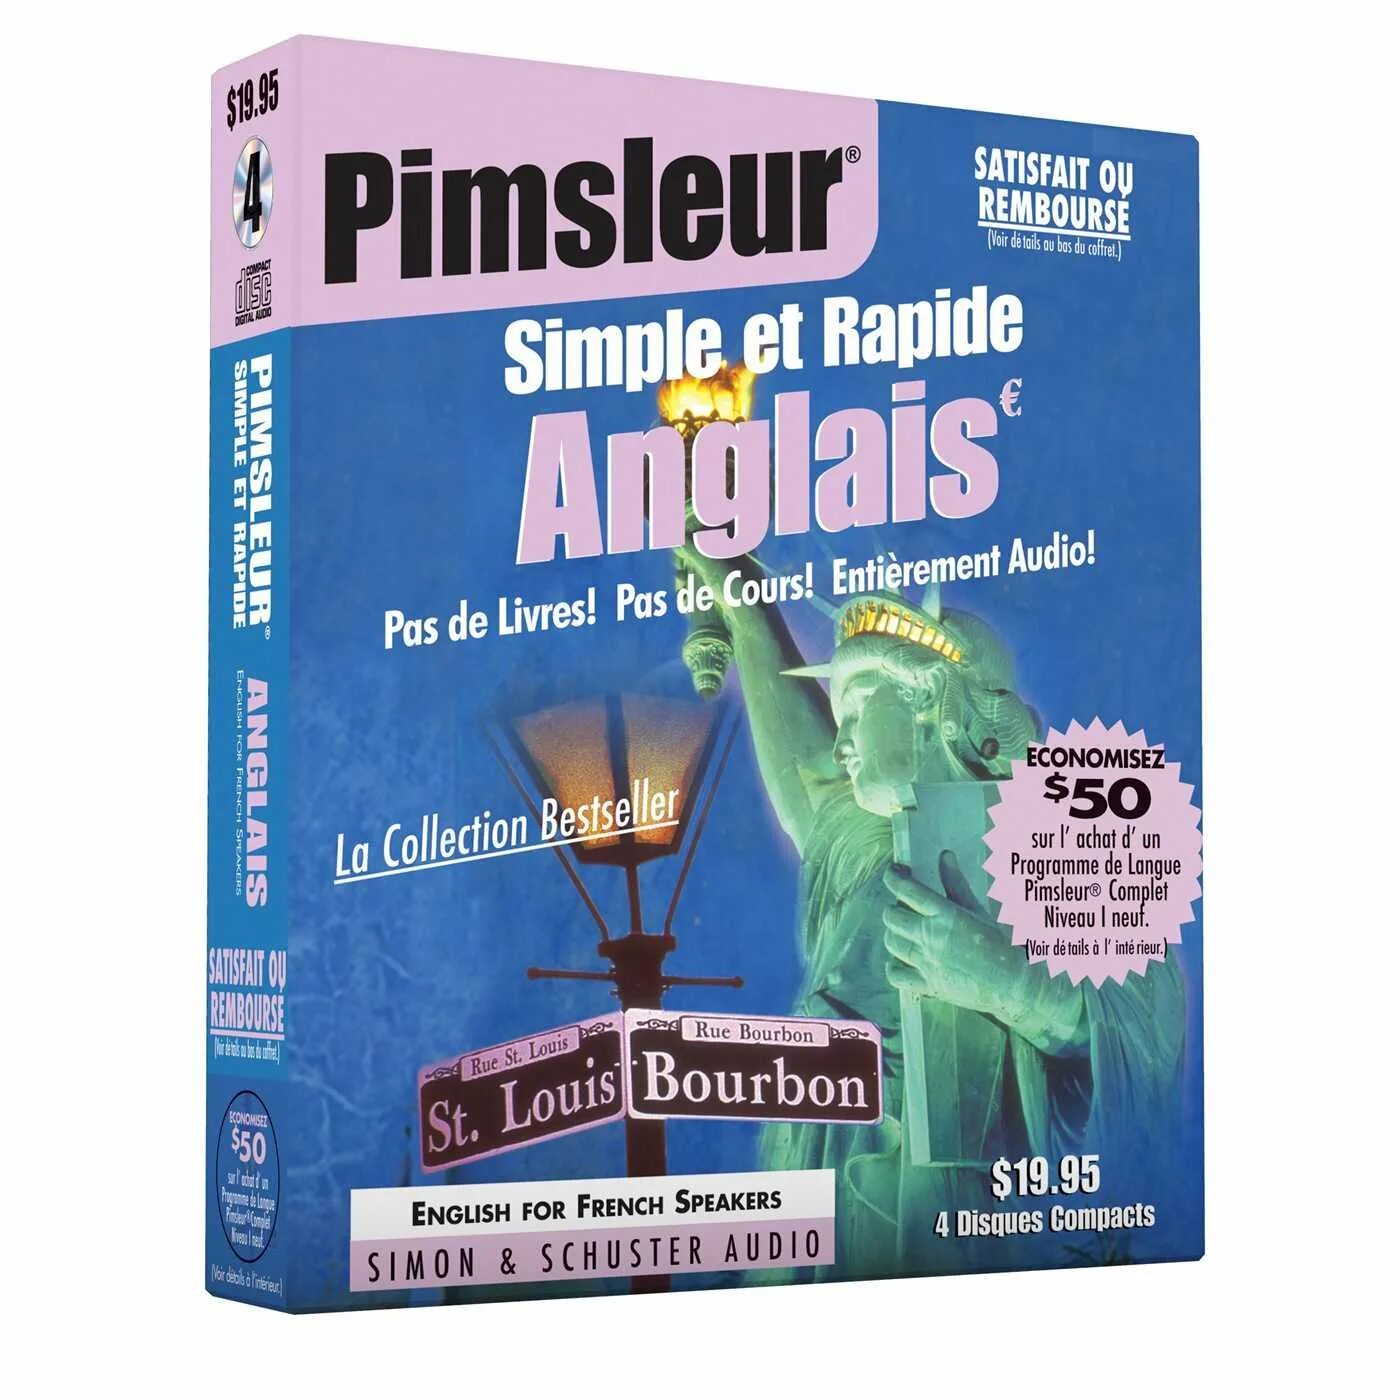 Pimsleur. Pimsleur French. Пимслер английский. Pimsleur English for Russian Speakers.